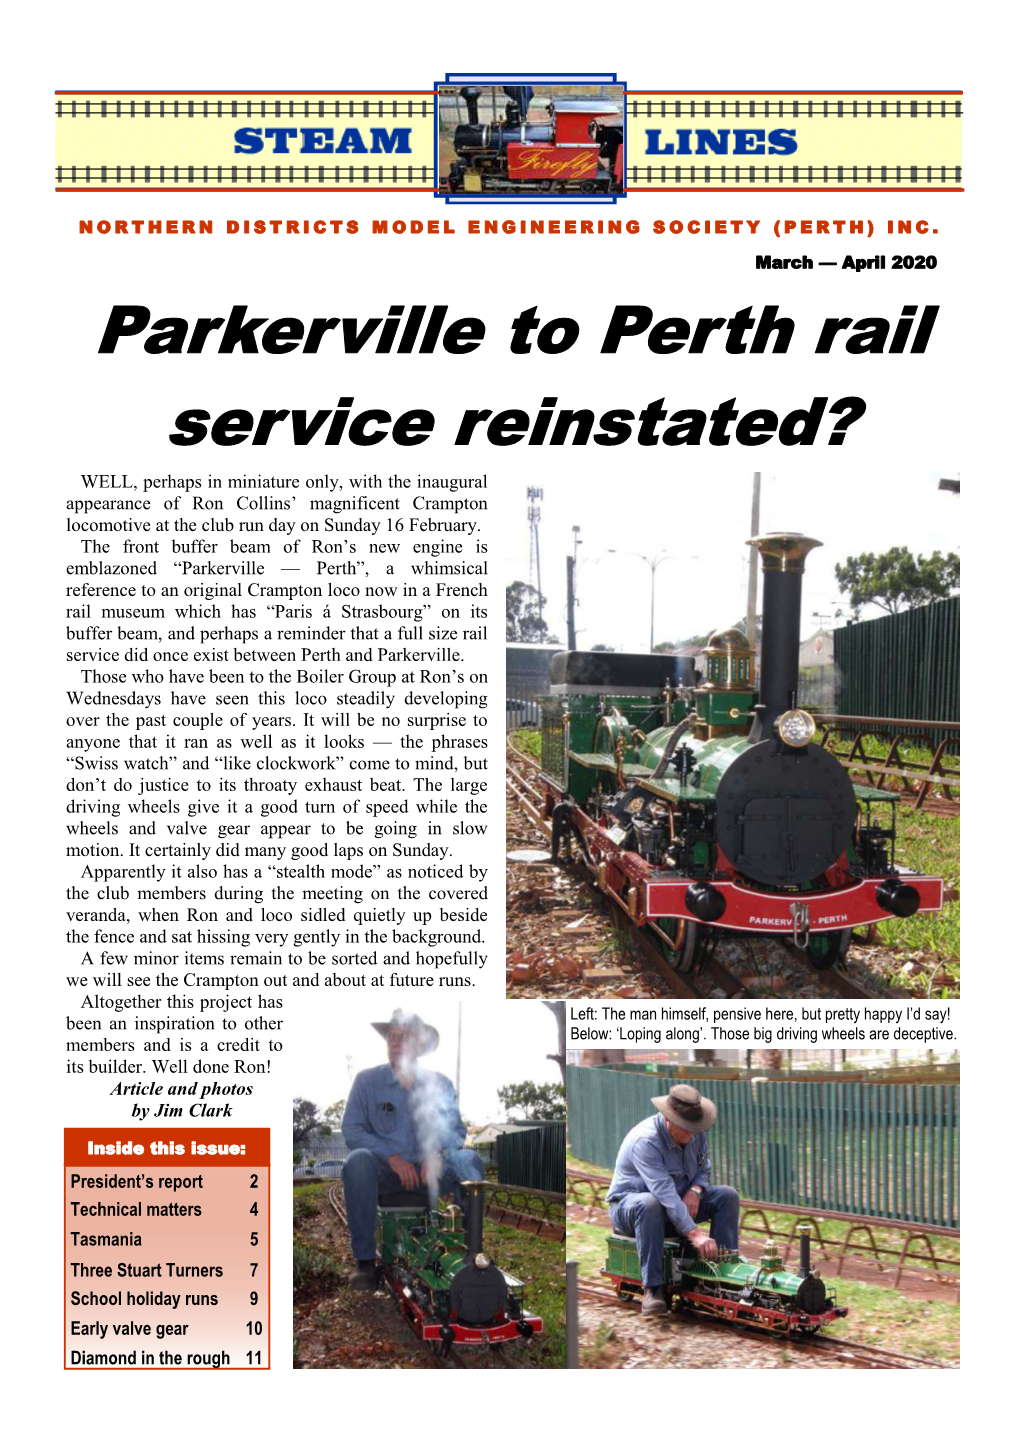 Parkerville to Perth Rail Service Reinstated?